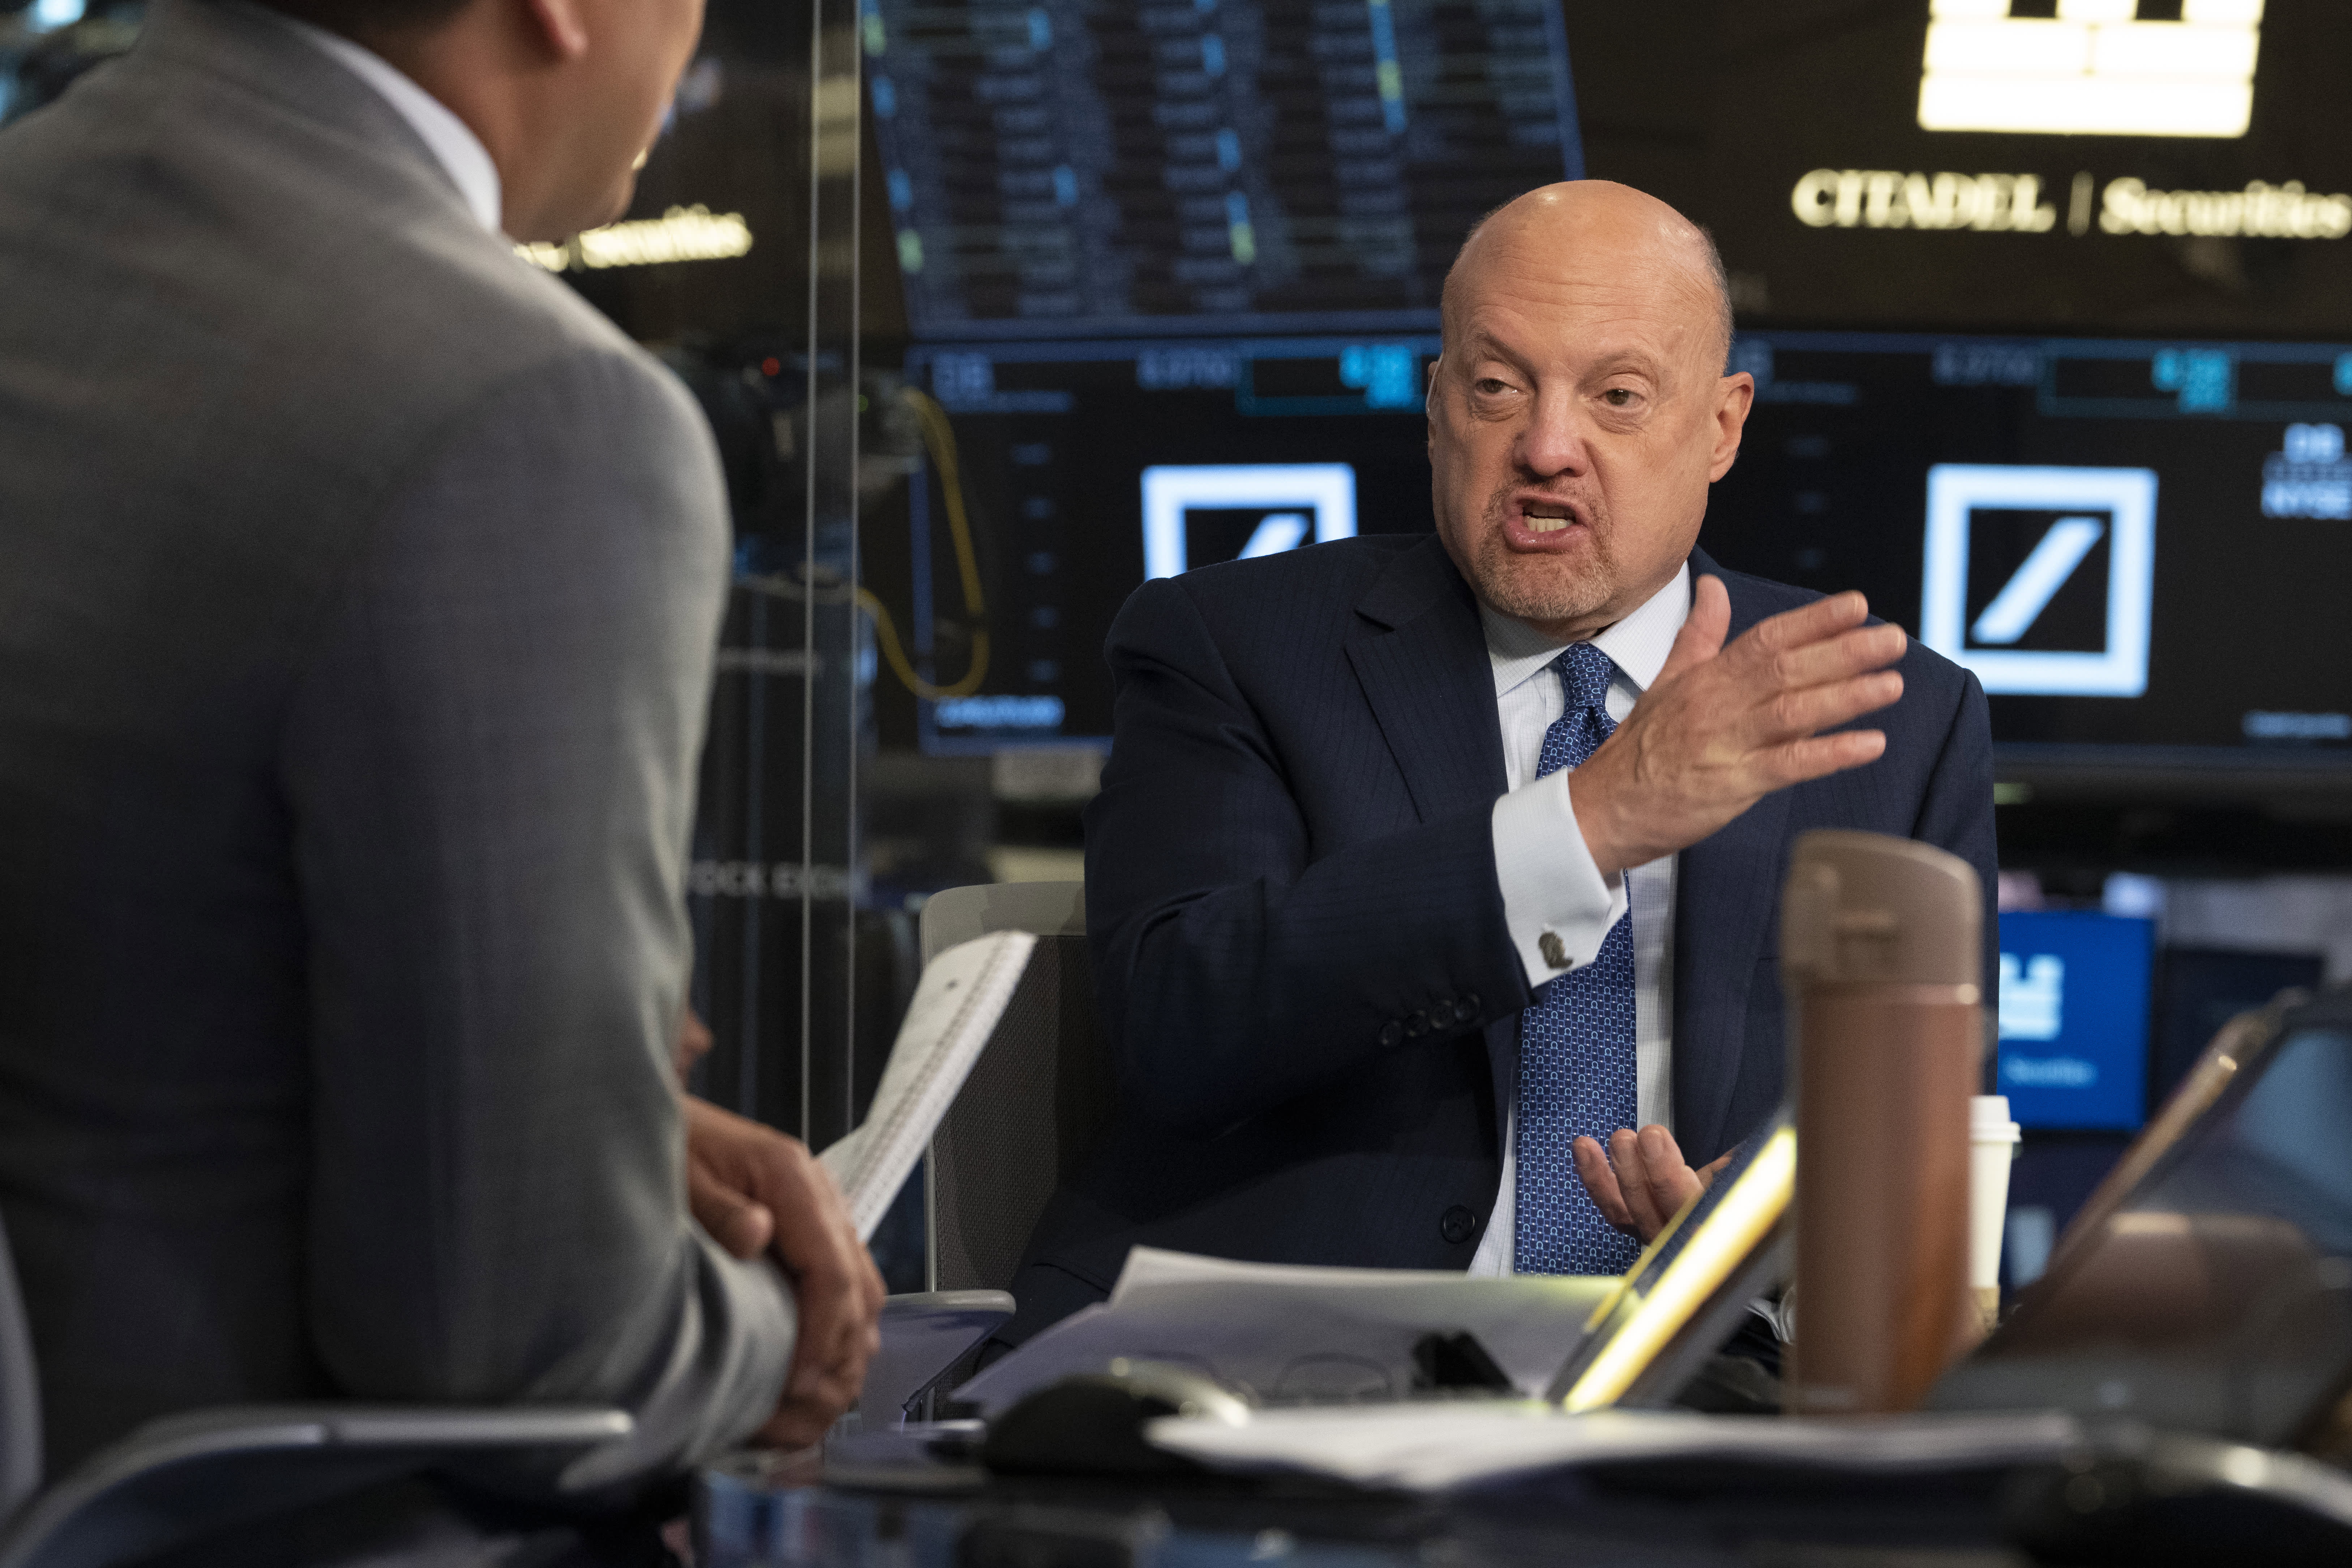 Jim Cramer's top 10 things to watch in the market Thursday: Cooler inflation, Salesforce co-CEO exit